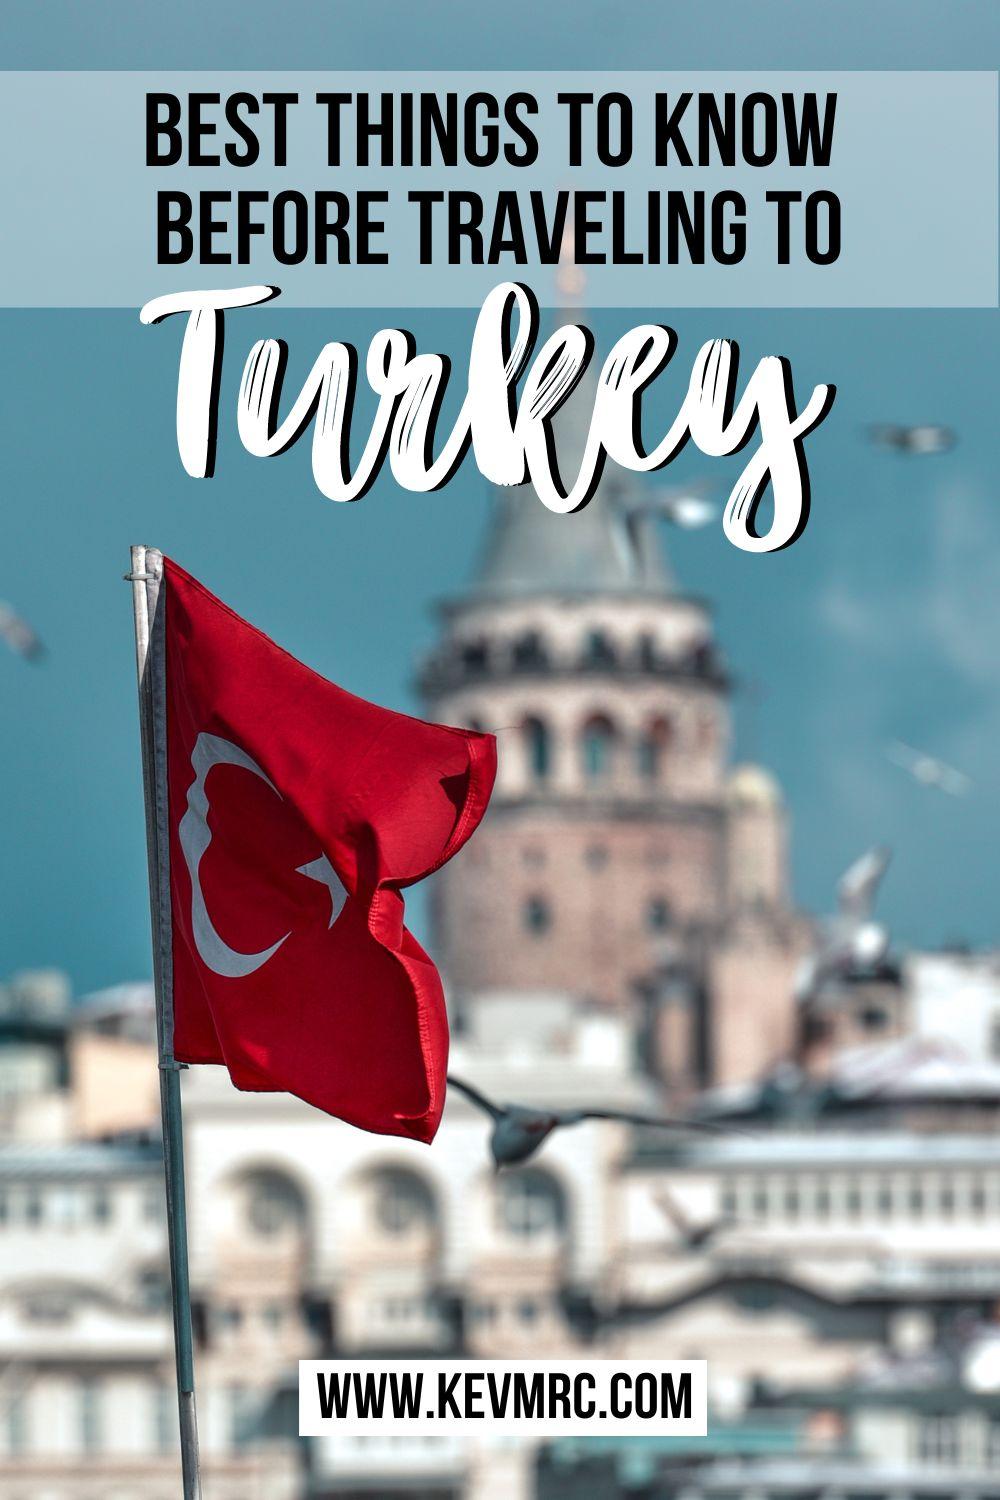 If you're heading to Turkey soon, you're lucky! But it's smart to look for some Turkey travel tips and advice as the country can be exotic depending on where you come from. Discover what not to do in Turkey, common scams, how to dress, what to pack, when to visit Turkey and more useful tips to make your trip to Turkey a success. traveling to turkey tips | turkey travel tips #travelturkey 